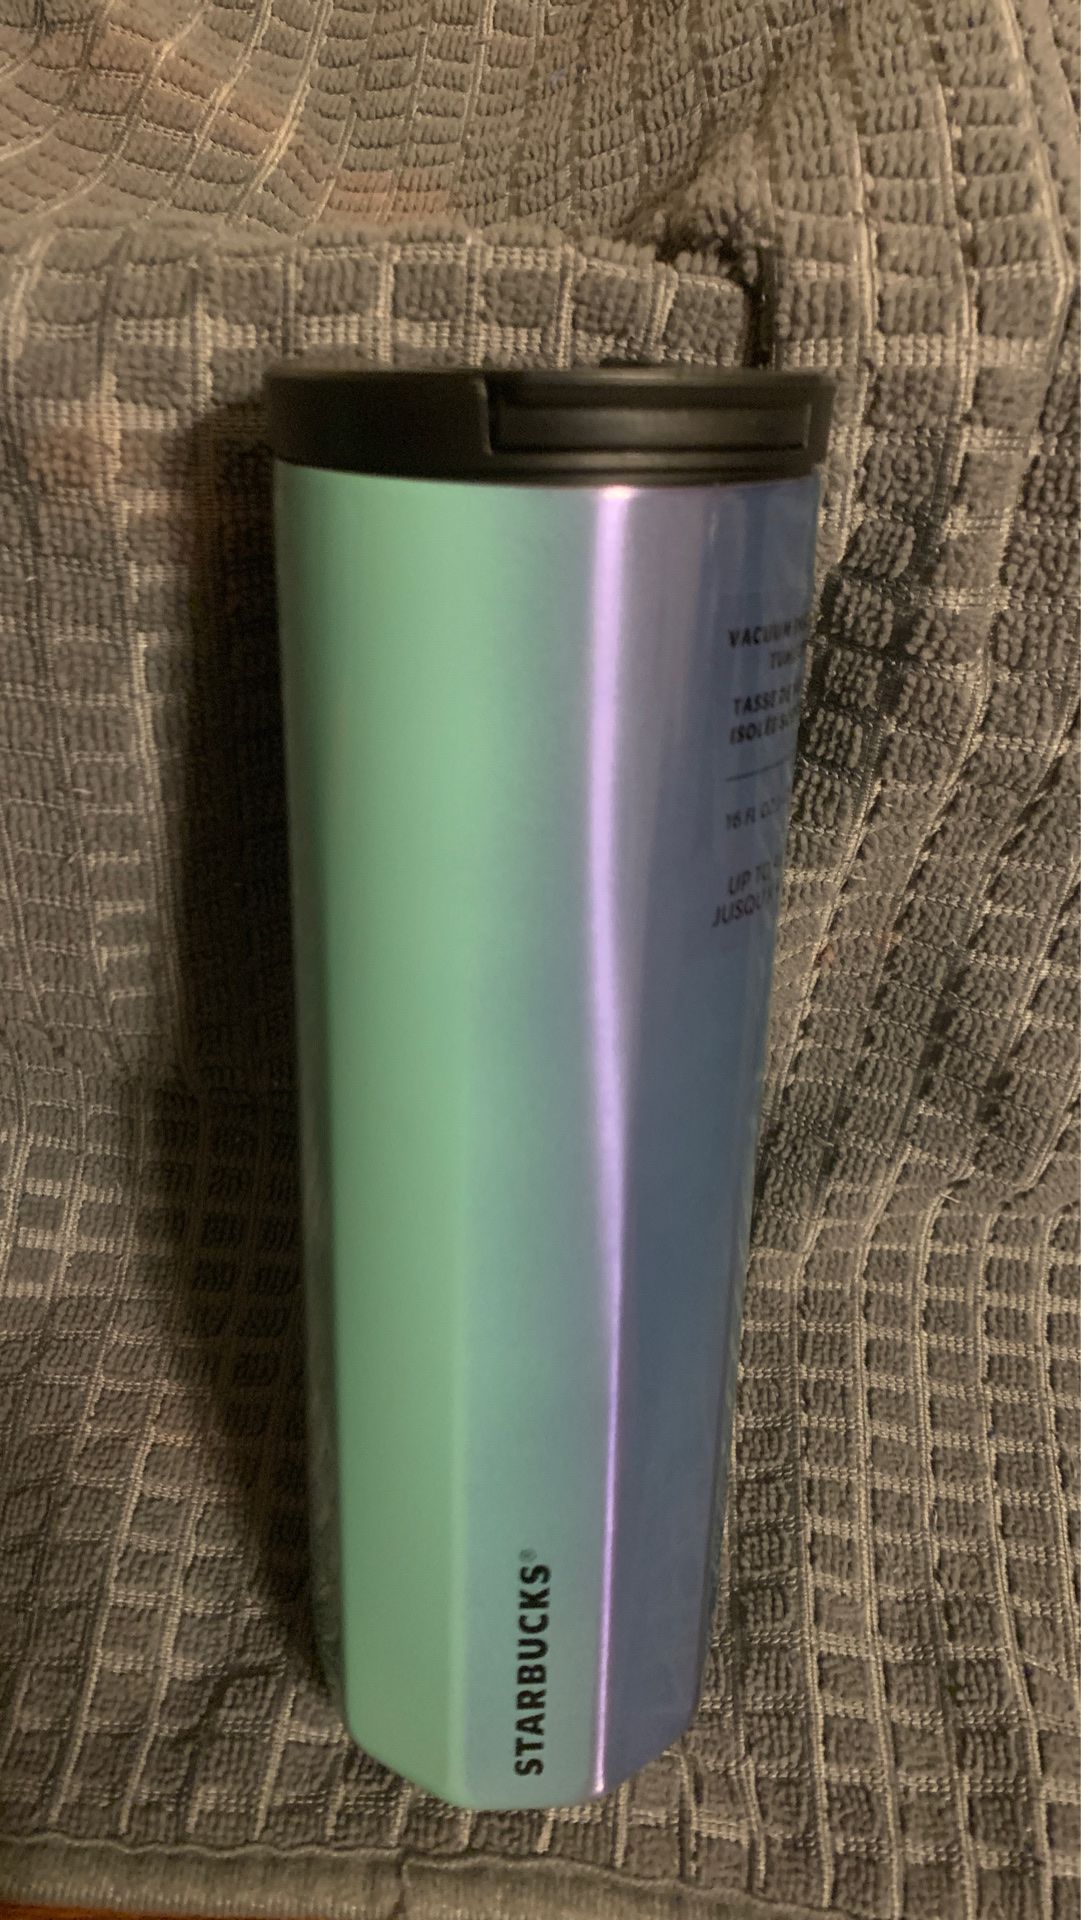 Starbucks NEW! Summer 2020 Ombré Collection.